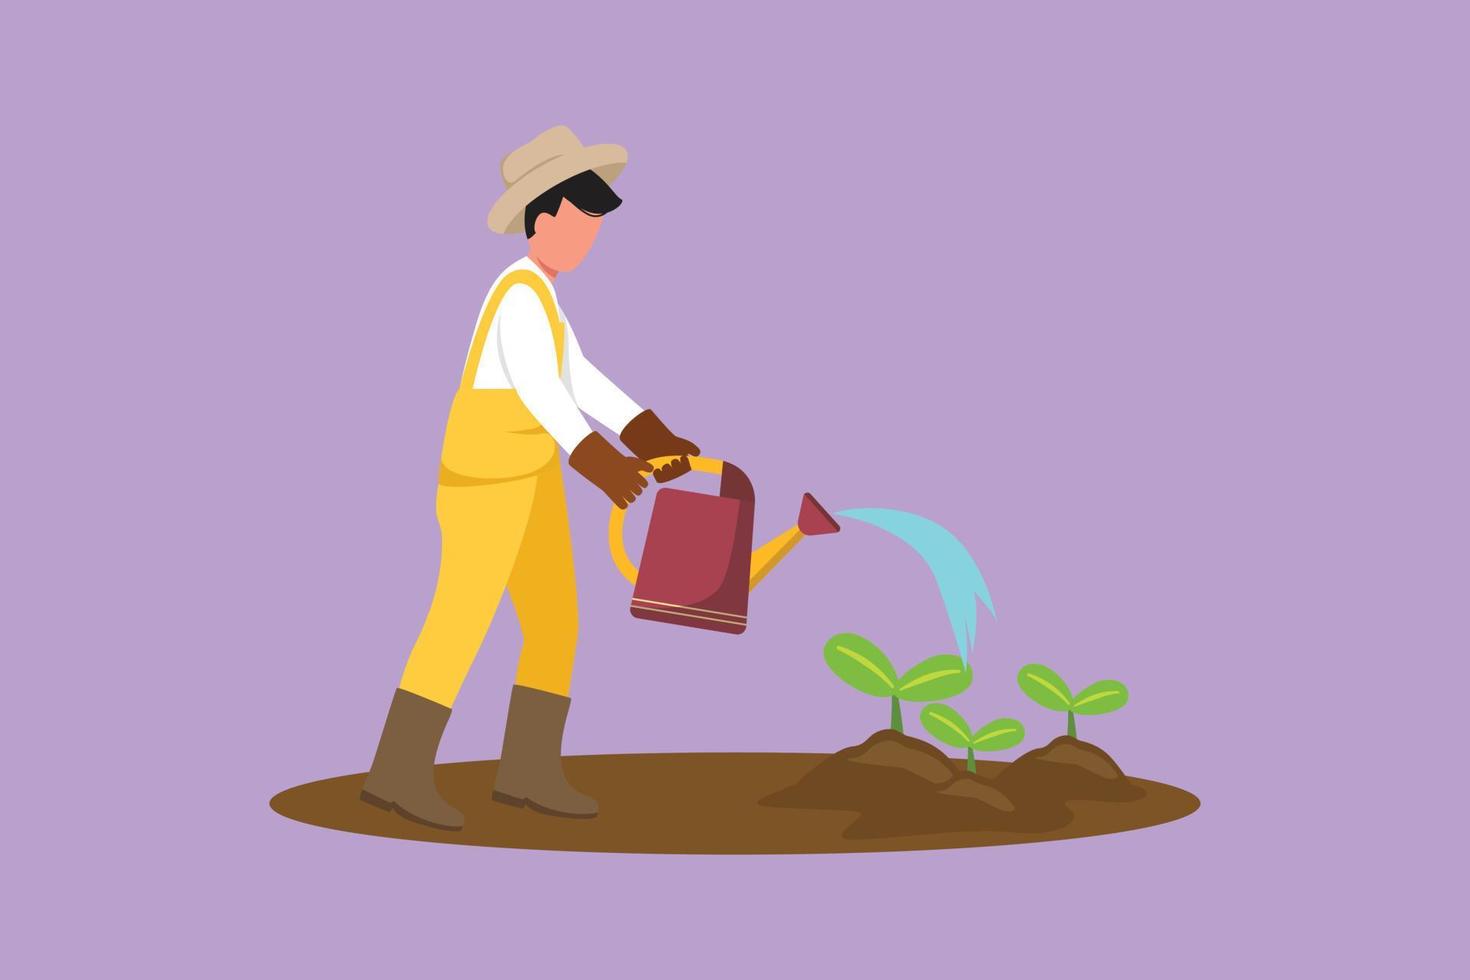 Graphic flat design drawing of young male farmer working in garden, watering vegetables. Smiling man in overalls, hat and boots with watering can pouring seeds plant. Cartoon style vector illustration